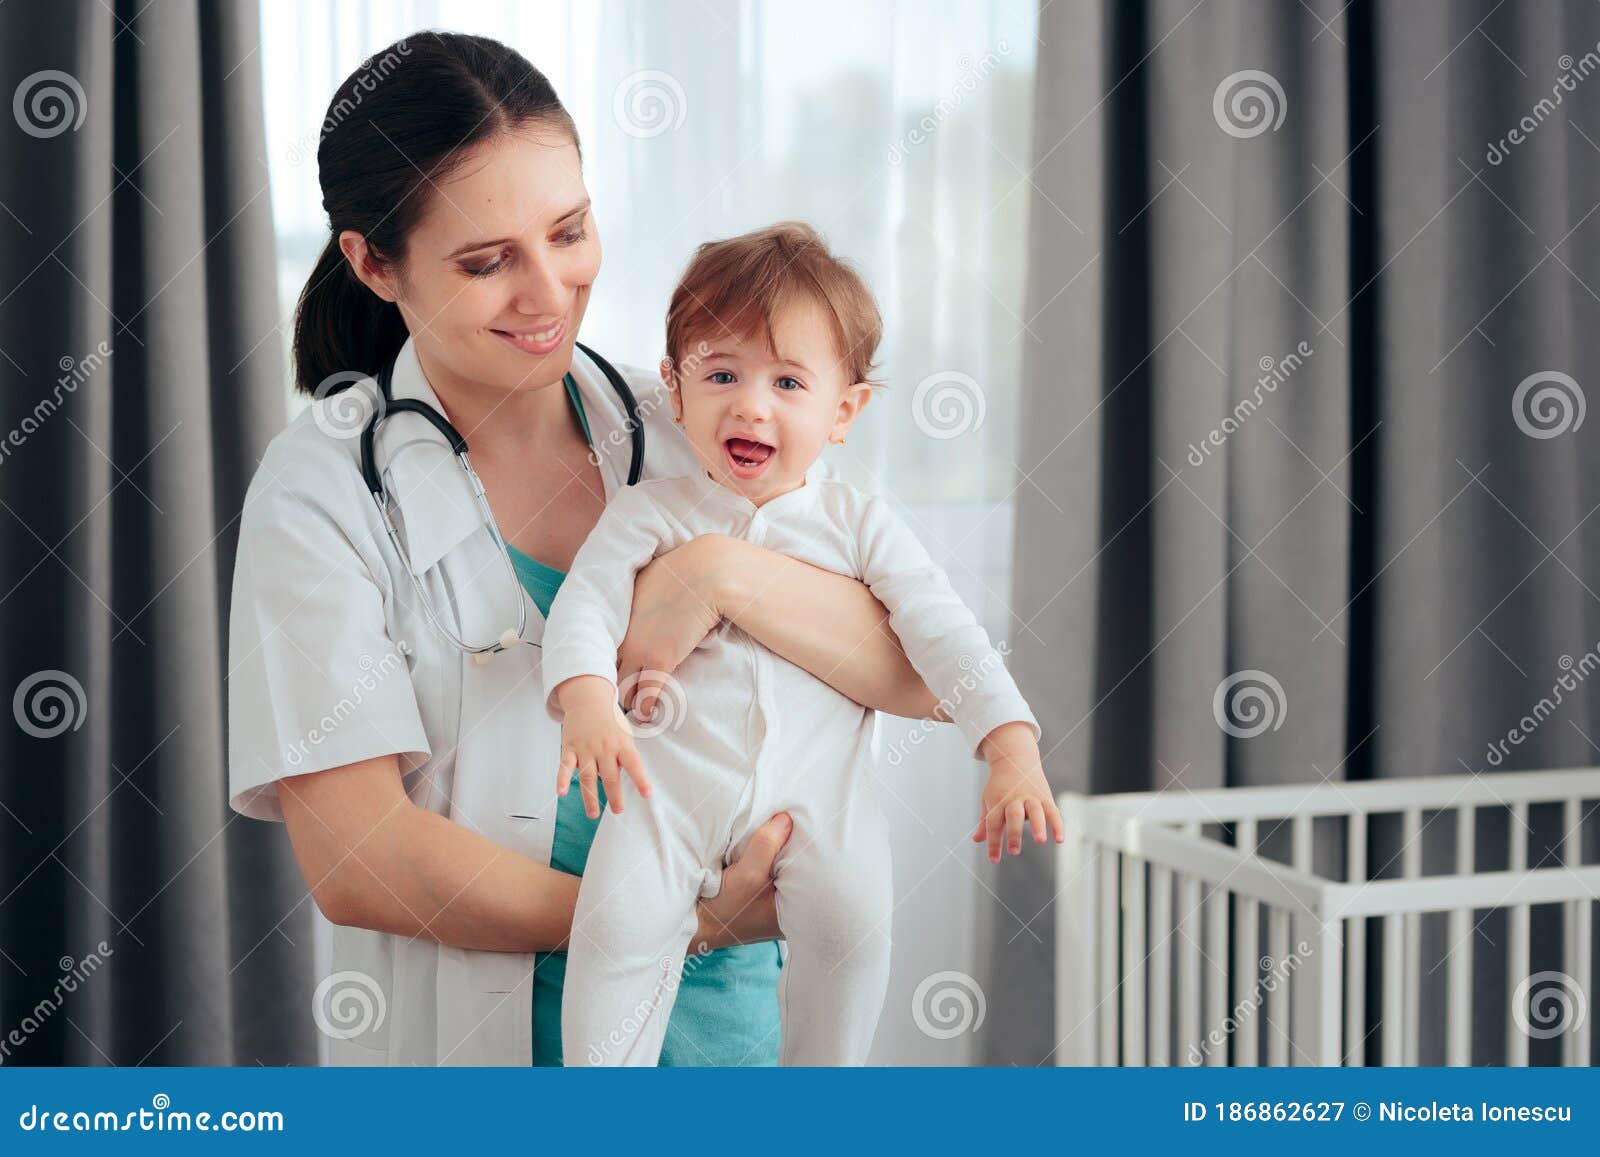 home visit doctor for baby